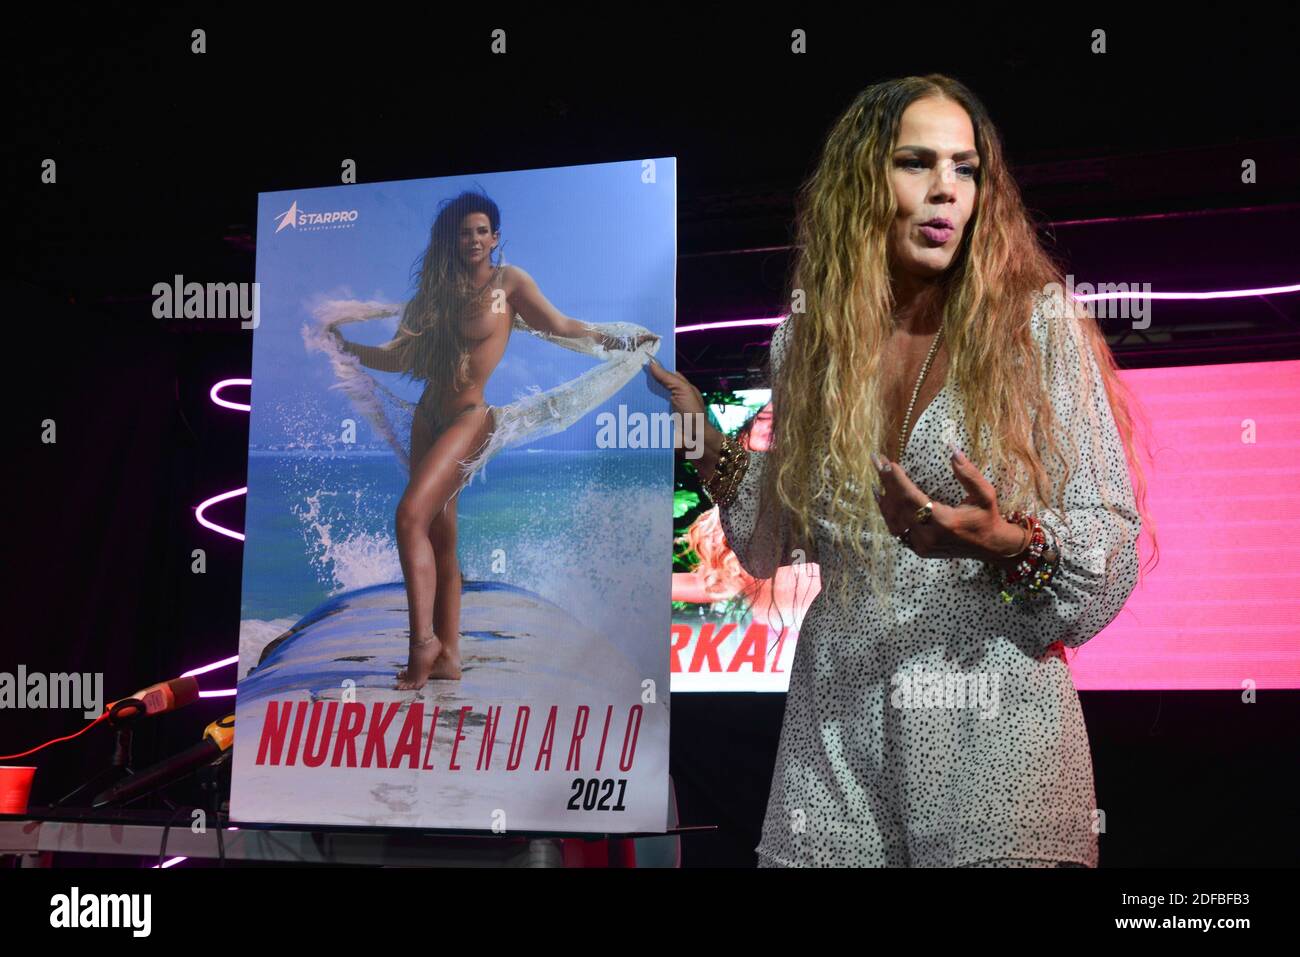 Mexico City, Mexico. 03rd Dec, 2020. MEXICO CITY, MEXICO - DECEMBER 3: Actress Niurka Marcos poses for photos during a press conference to launch her calendar ‘Niurkalendar' at Rico Club on December 3, 2020 in Mexico City, Mexico. Credit: Carlos Tischler/Eyepix Group/The Photo Access Credit: The Photo Access/Alamy Live News Stock Photo